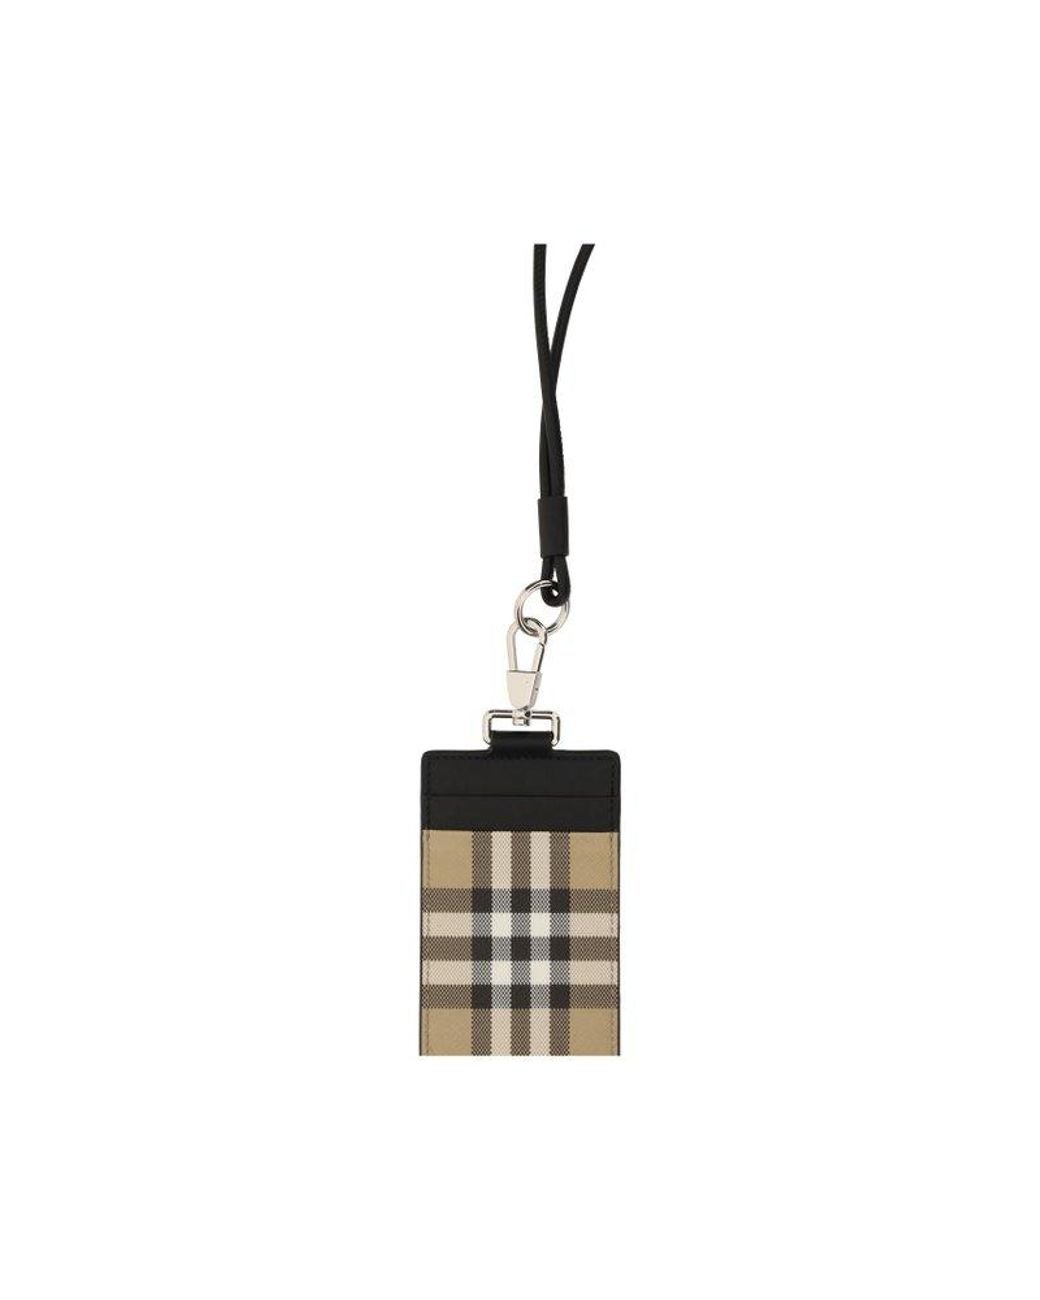 Best Deals for Burberry Id Holder